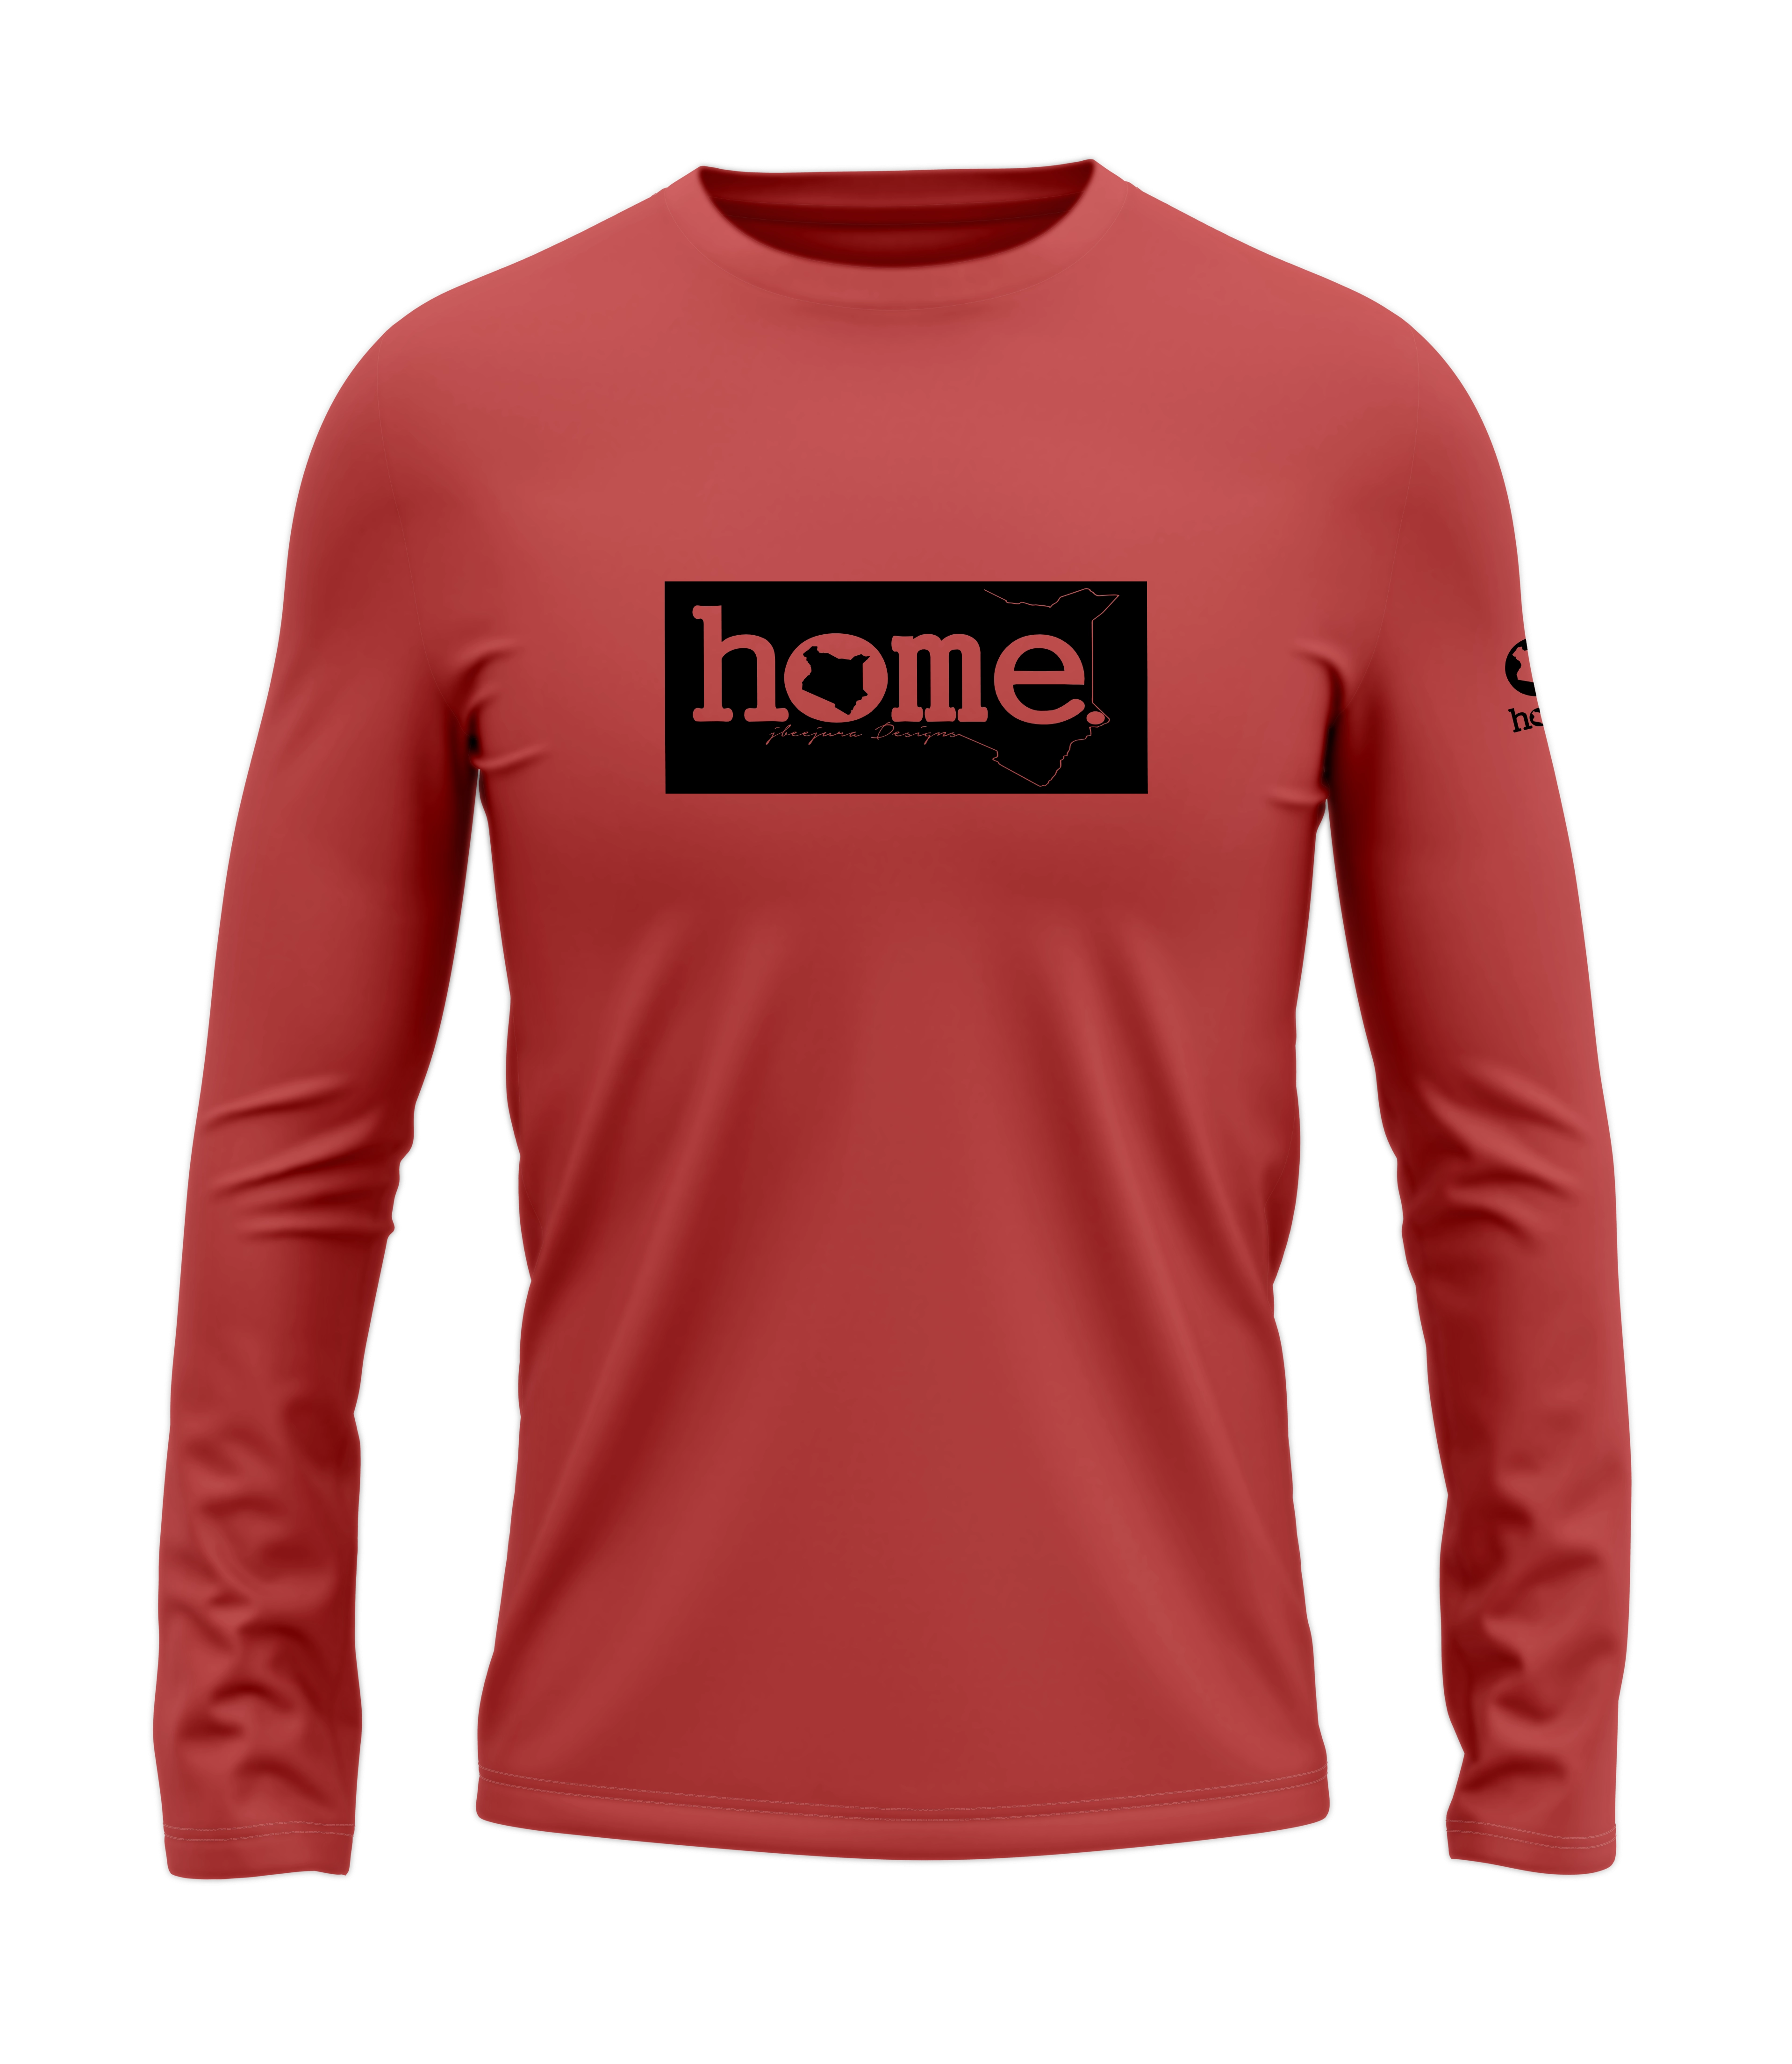 home_254 LONG-SLEEVED MULBERRY T-SHIRT WITH A BLACK CLASSIC PRINT – COTTON PLUS FABRIC